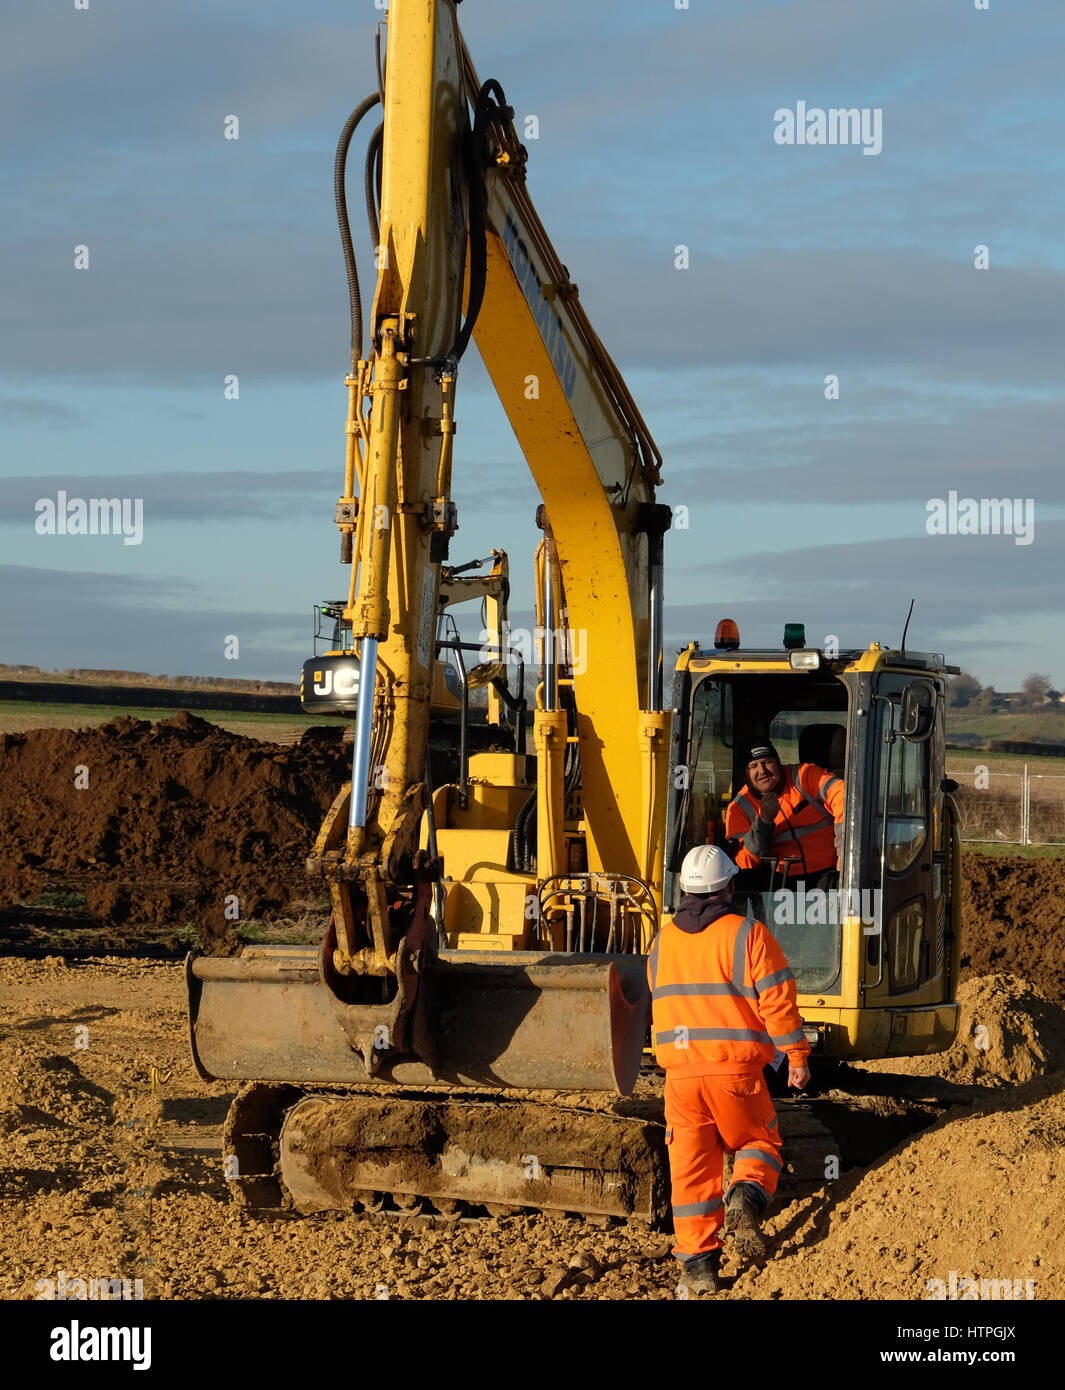 Heavy machinery used in the preparation of land for house building, Grantham Lincolnshire, England, UK. Stock Photo